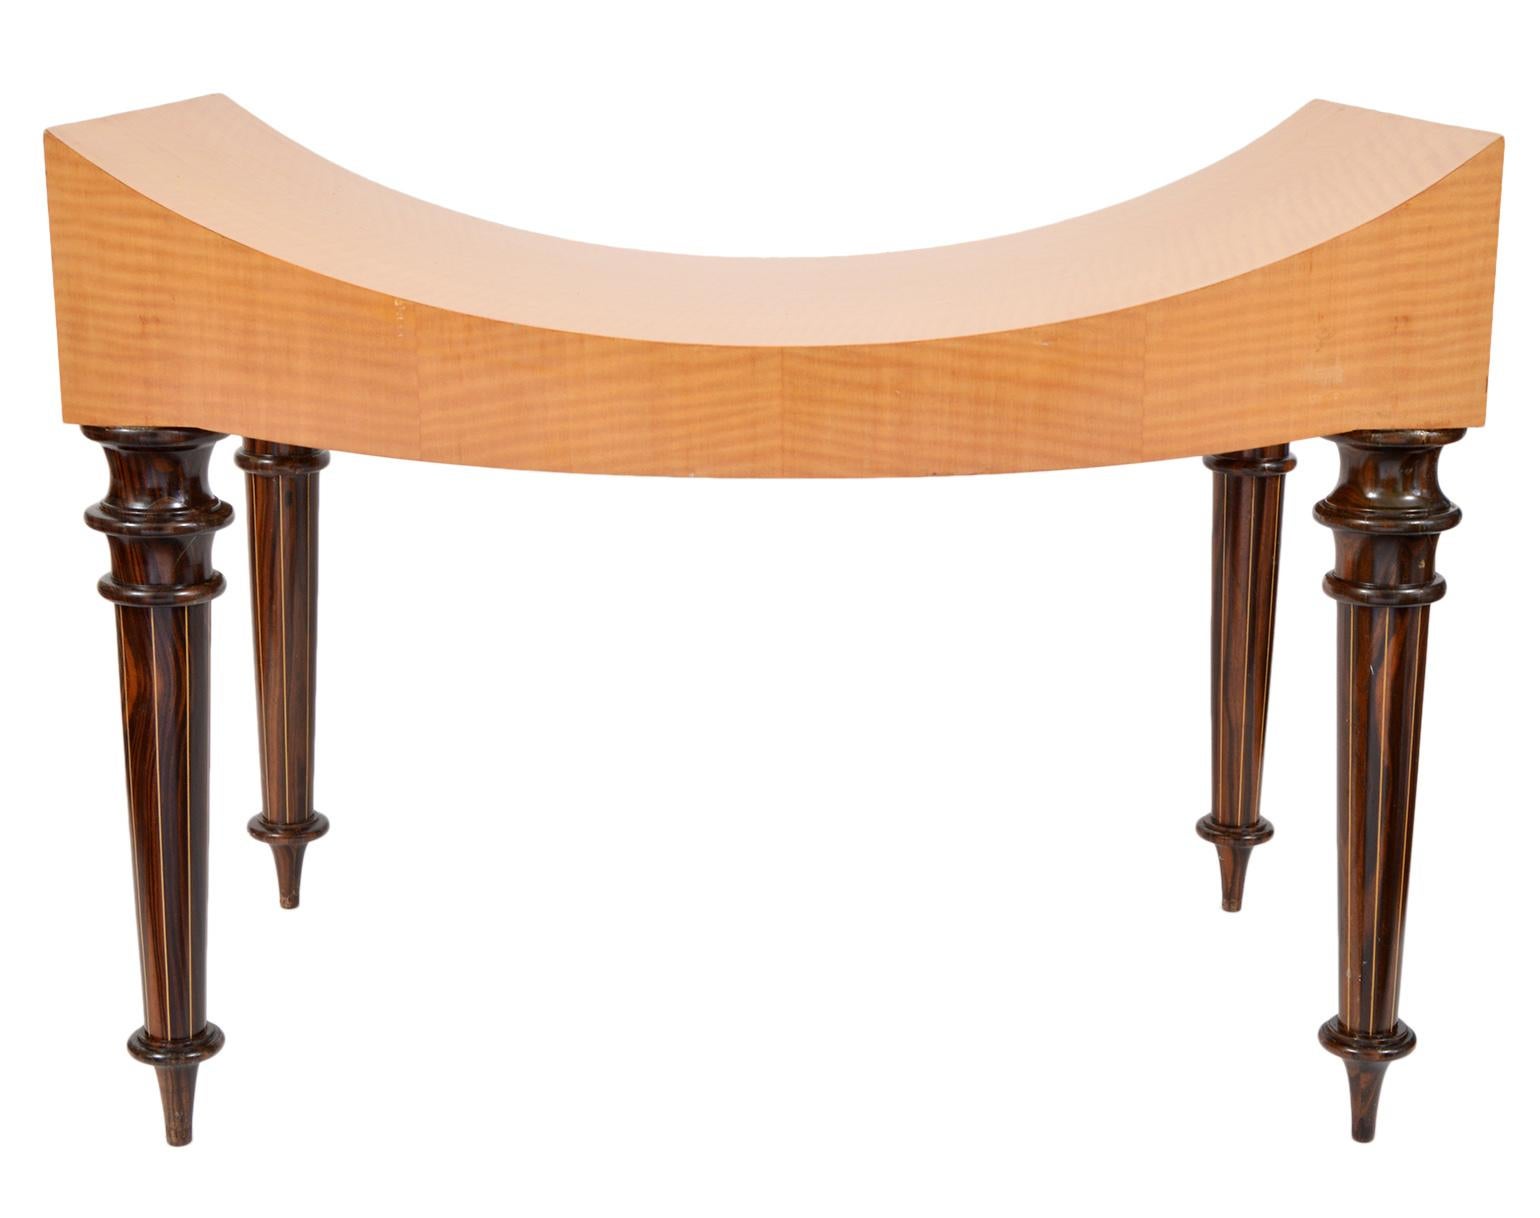 Exiting design by Todd Granzow, Santa Fe, combining minimalist tiger maple shaped seats with 19th century style turned and string inlaid rosewood legs. A feast for the eyes.